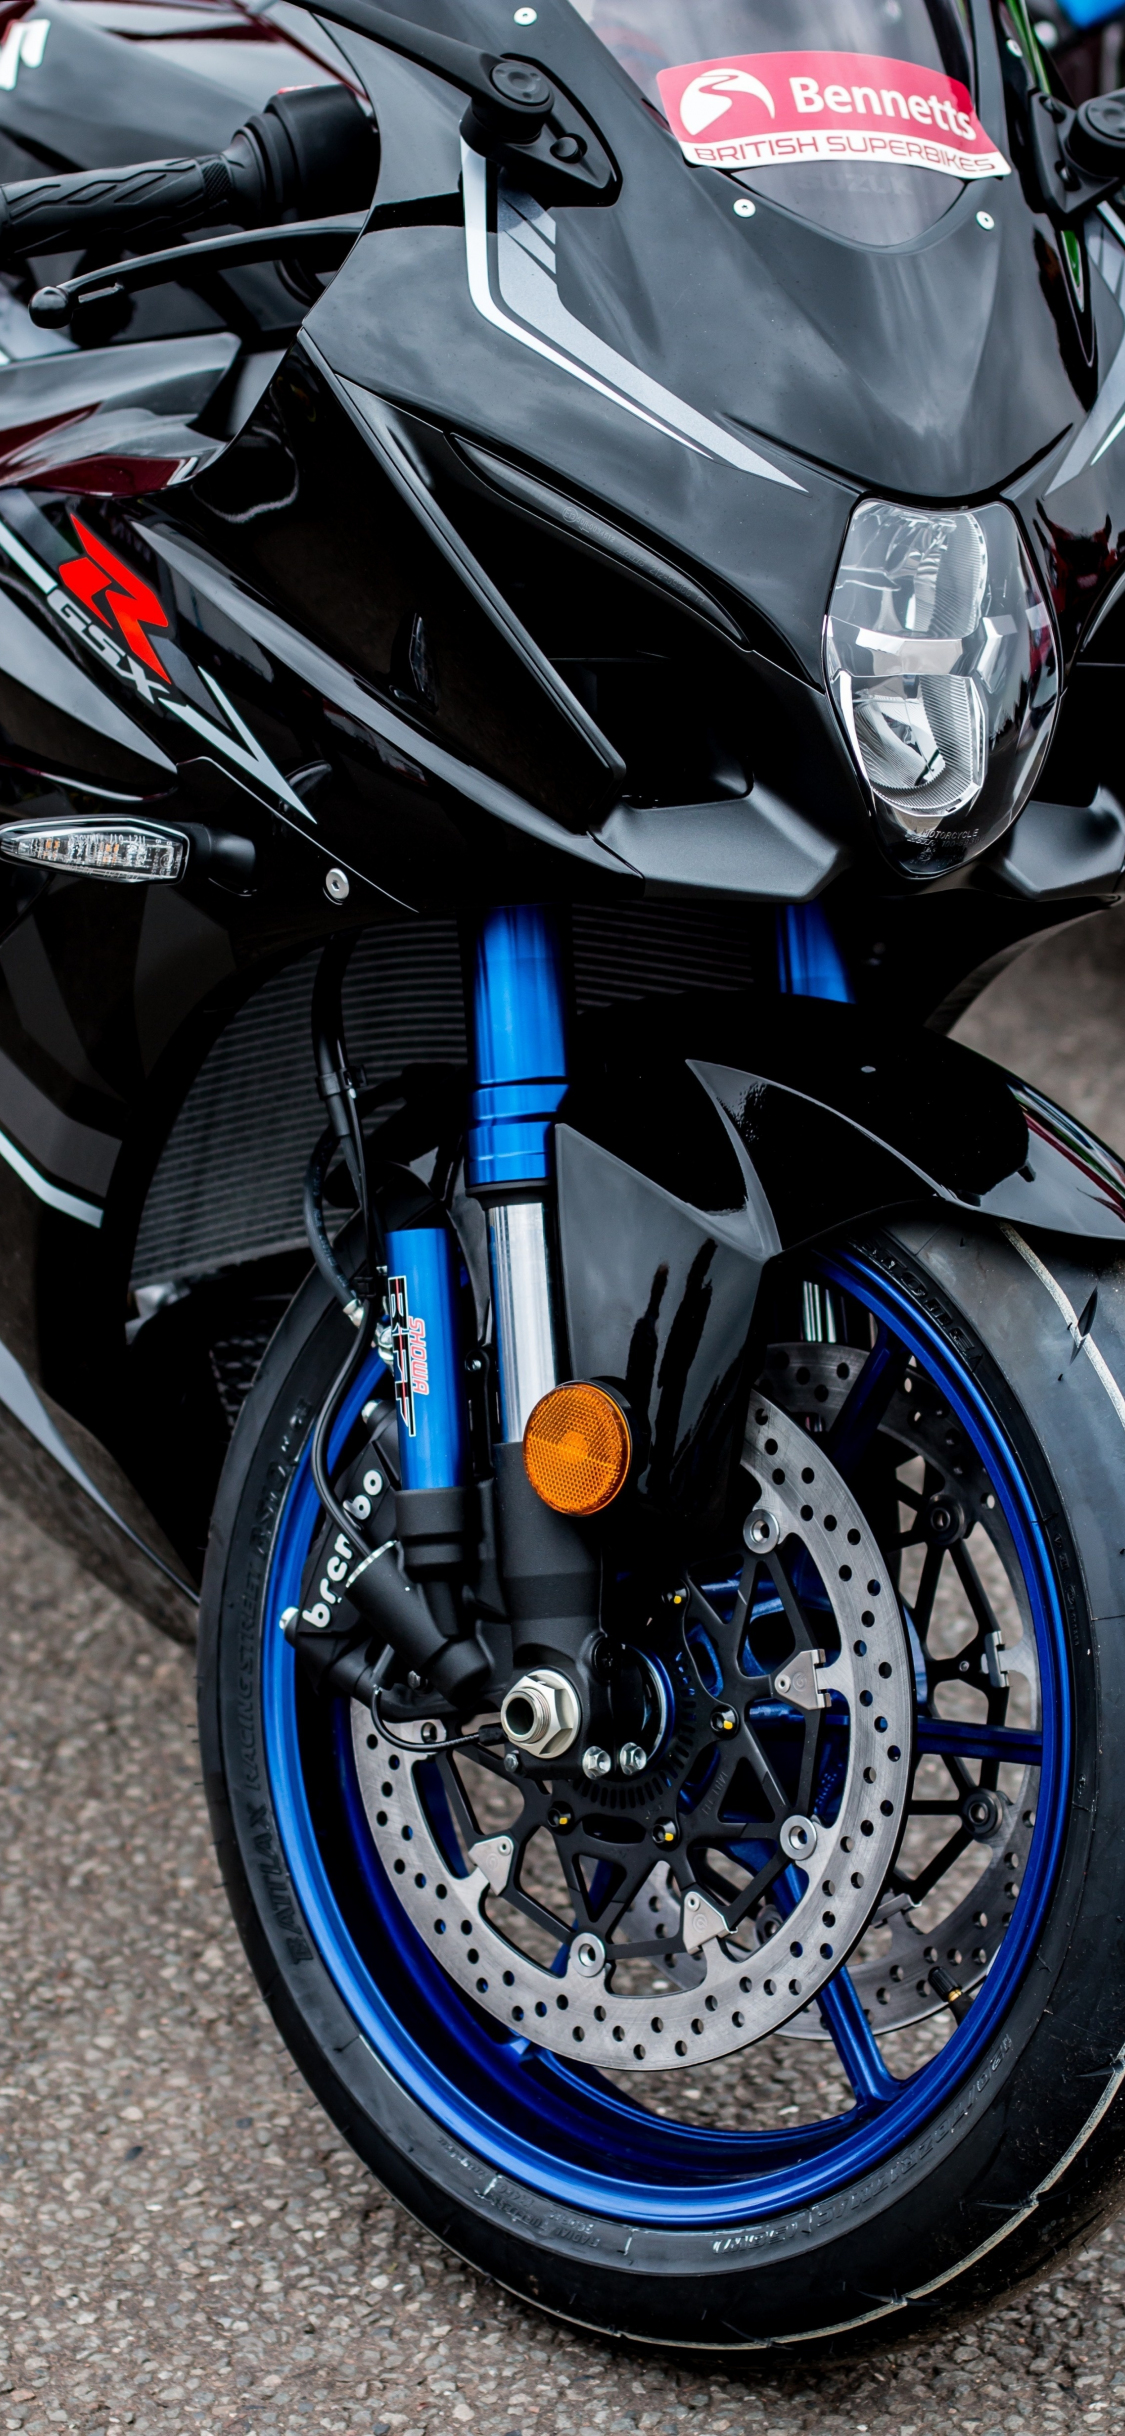 Gsxr1000 Wallpapers